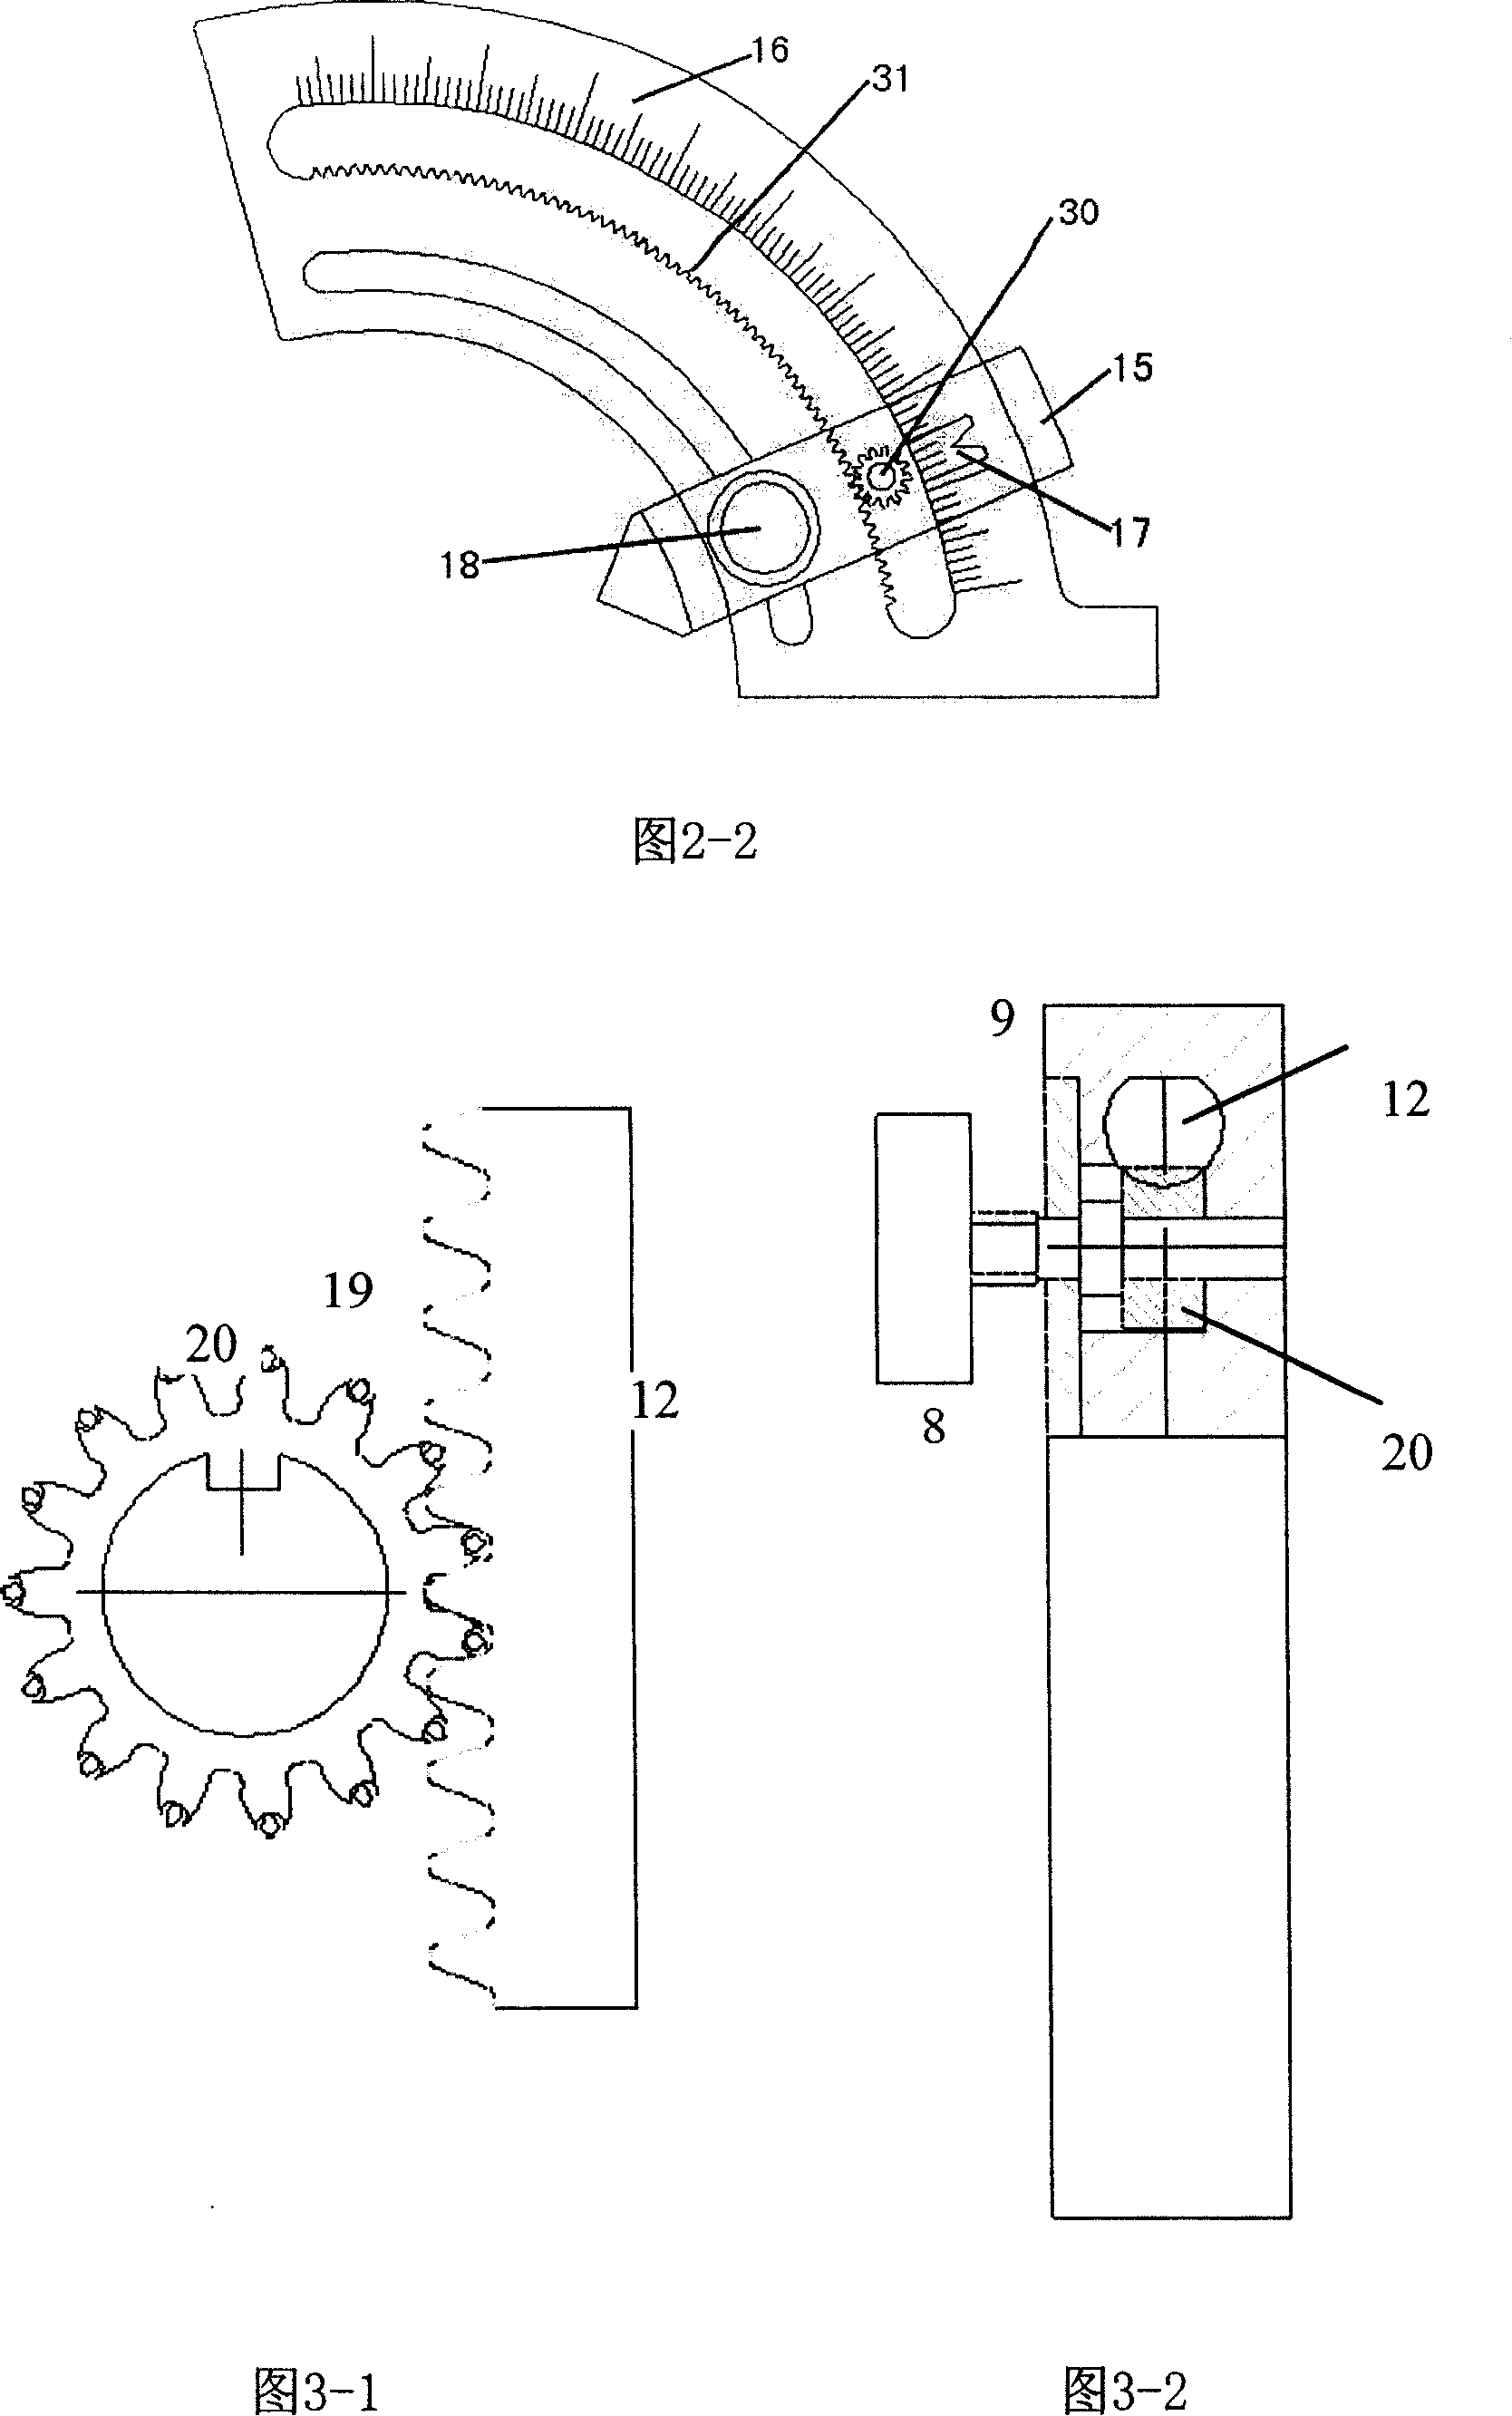 CT positioning percutaneously inserting puncture instrument